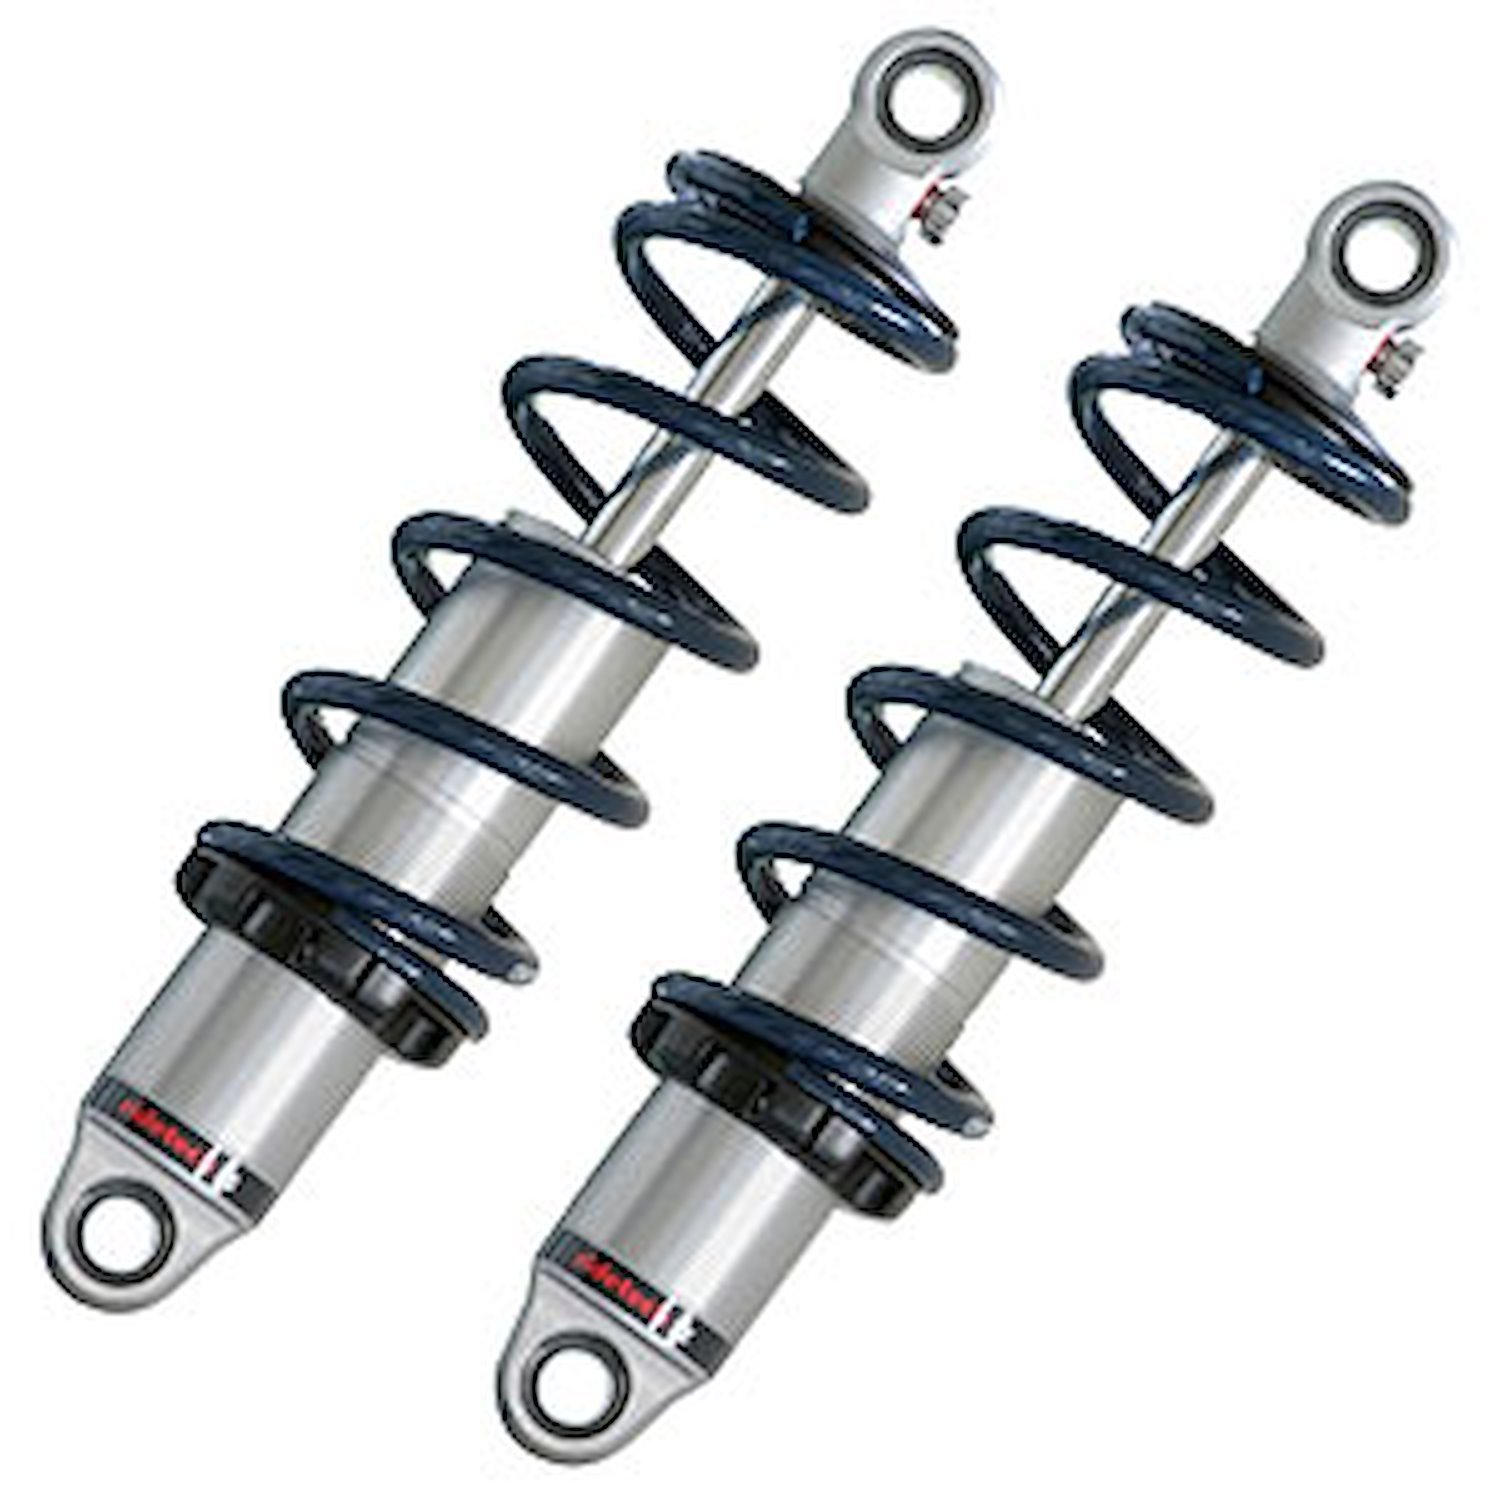 HQ Series Single-Adjustable Rear Coil-Over Shocks 1955-1957 Chevy Tri-Five